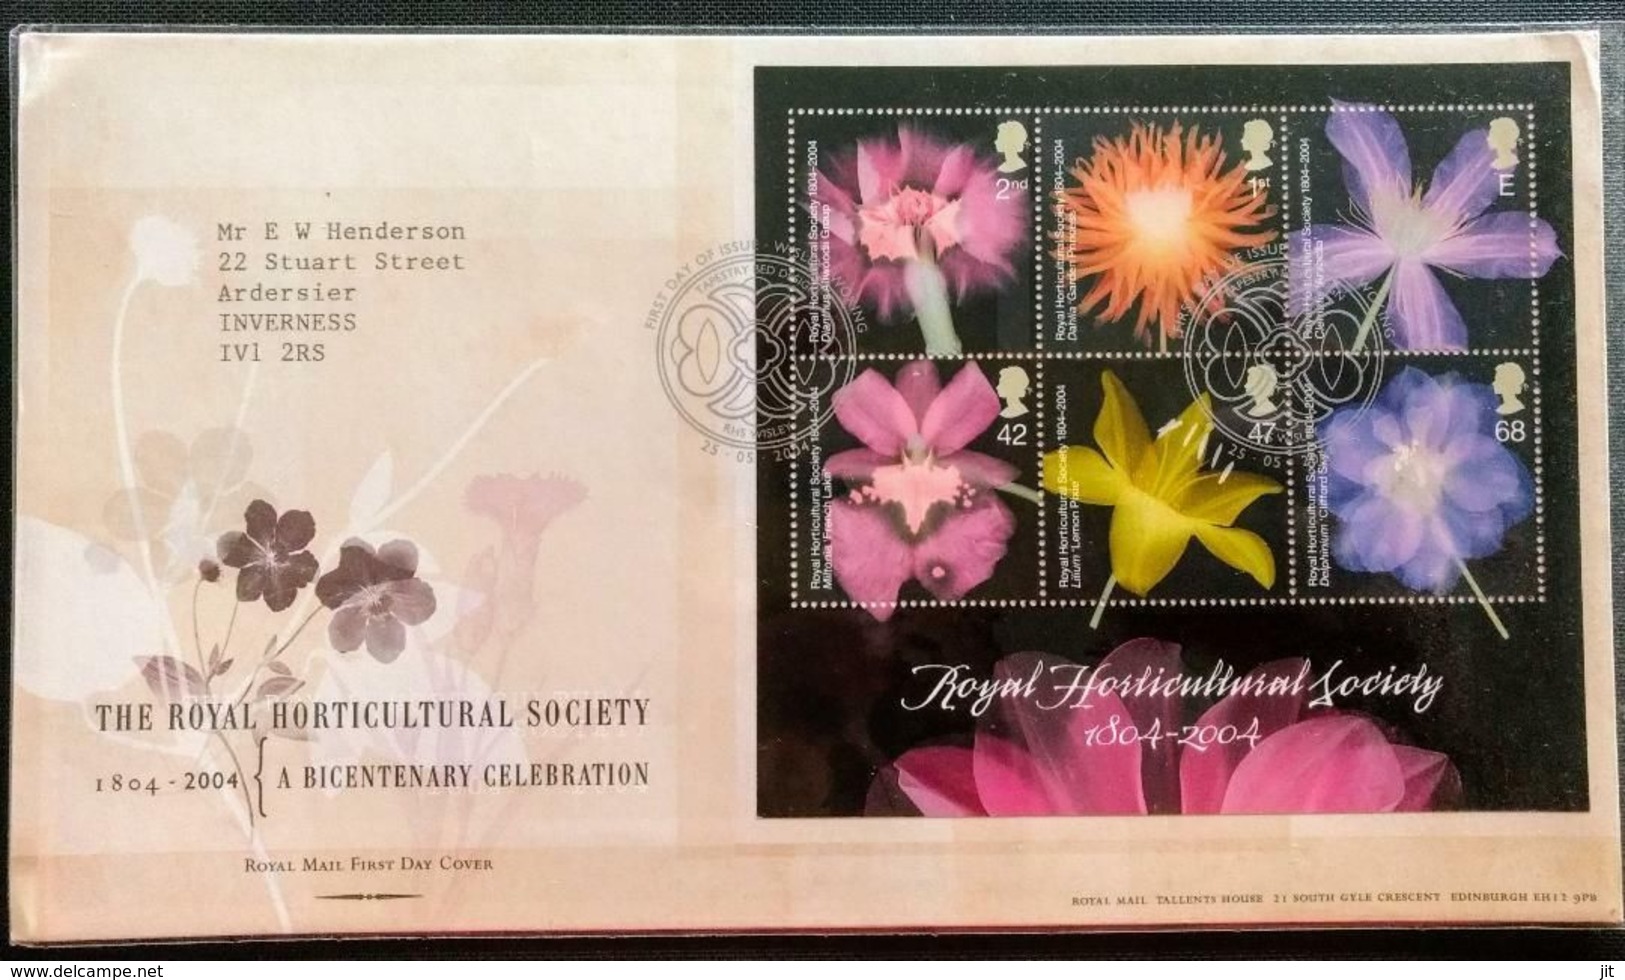 139.GREAT BRITAIN 2004 STAMP M/S THE ROYAL HORTICULTURAL SOCIETY FDC - 2011-2020 Decimal Issues